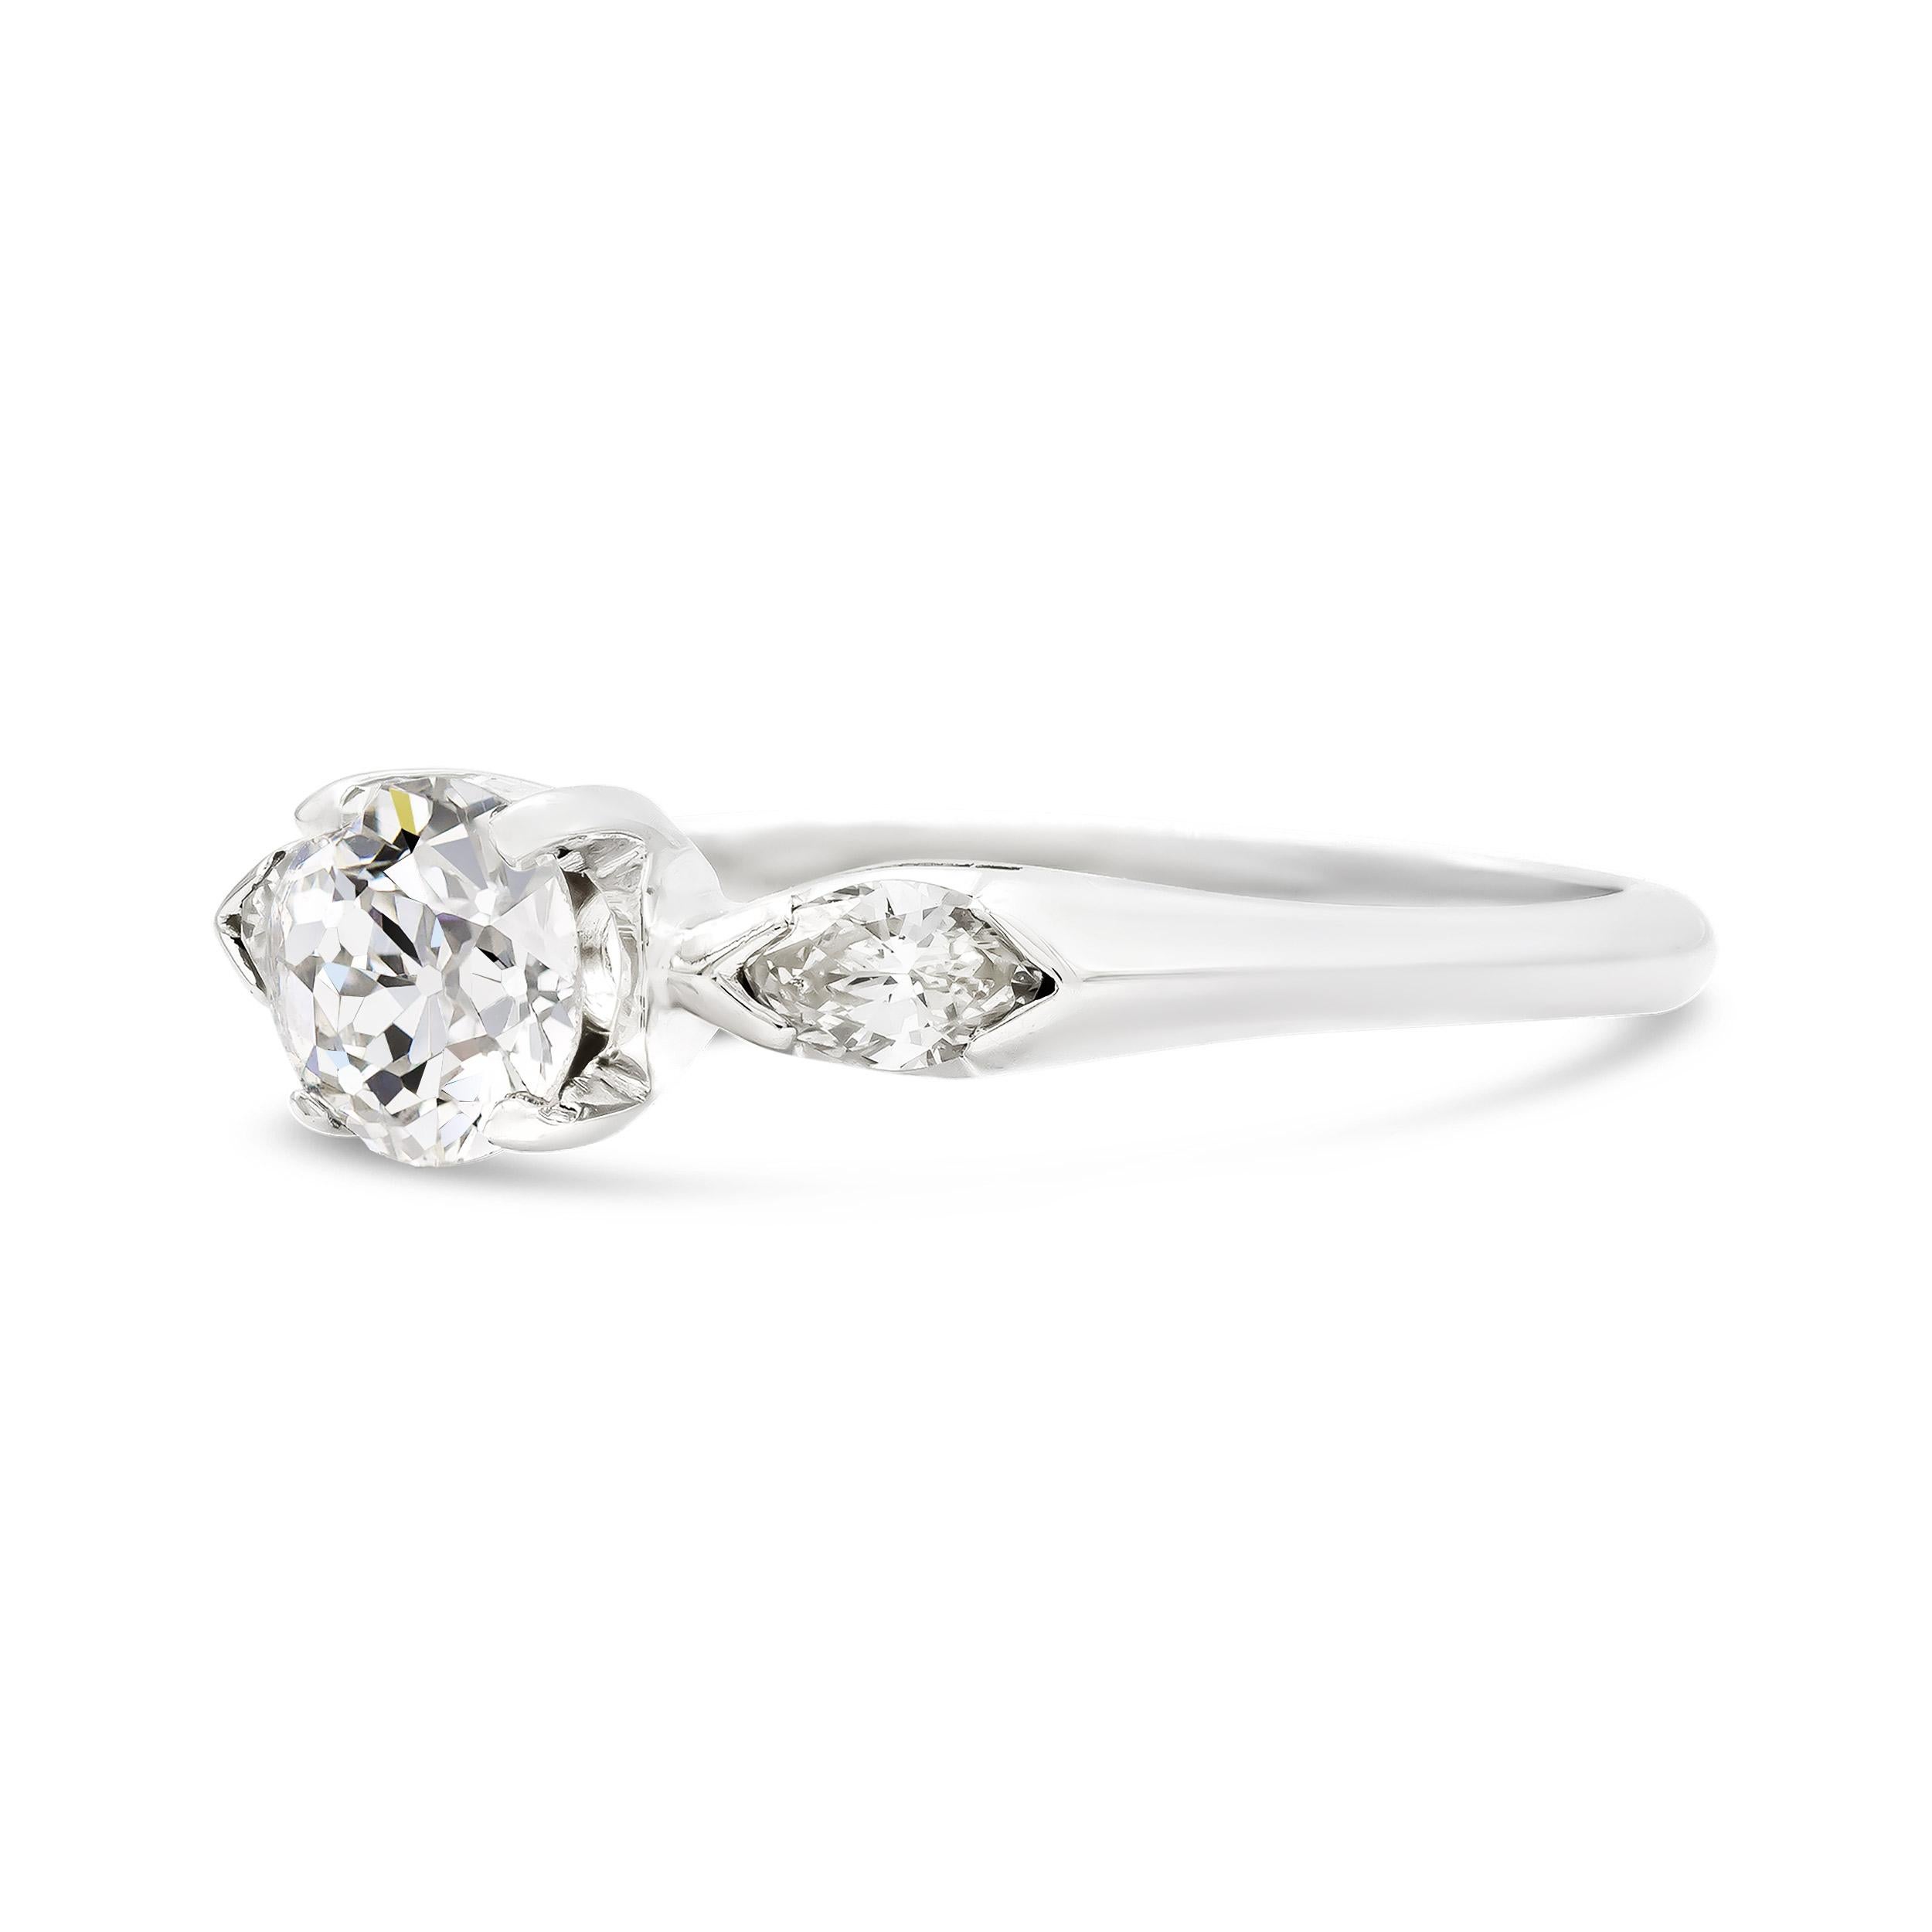 Crisp, clean, and brilliant. That's just what will come to mind when you slip on this super charming engagement ring. The two accenting marquise cut diamonds enhance our center old European cut perfectly. We think this ring is a great under 1 carat